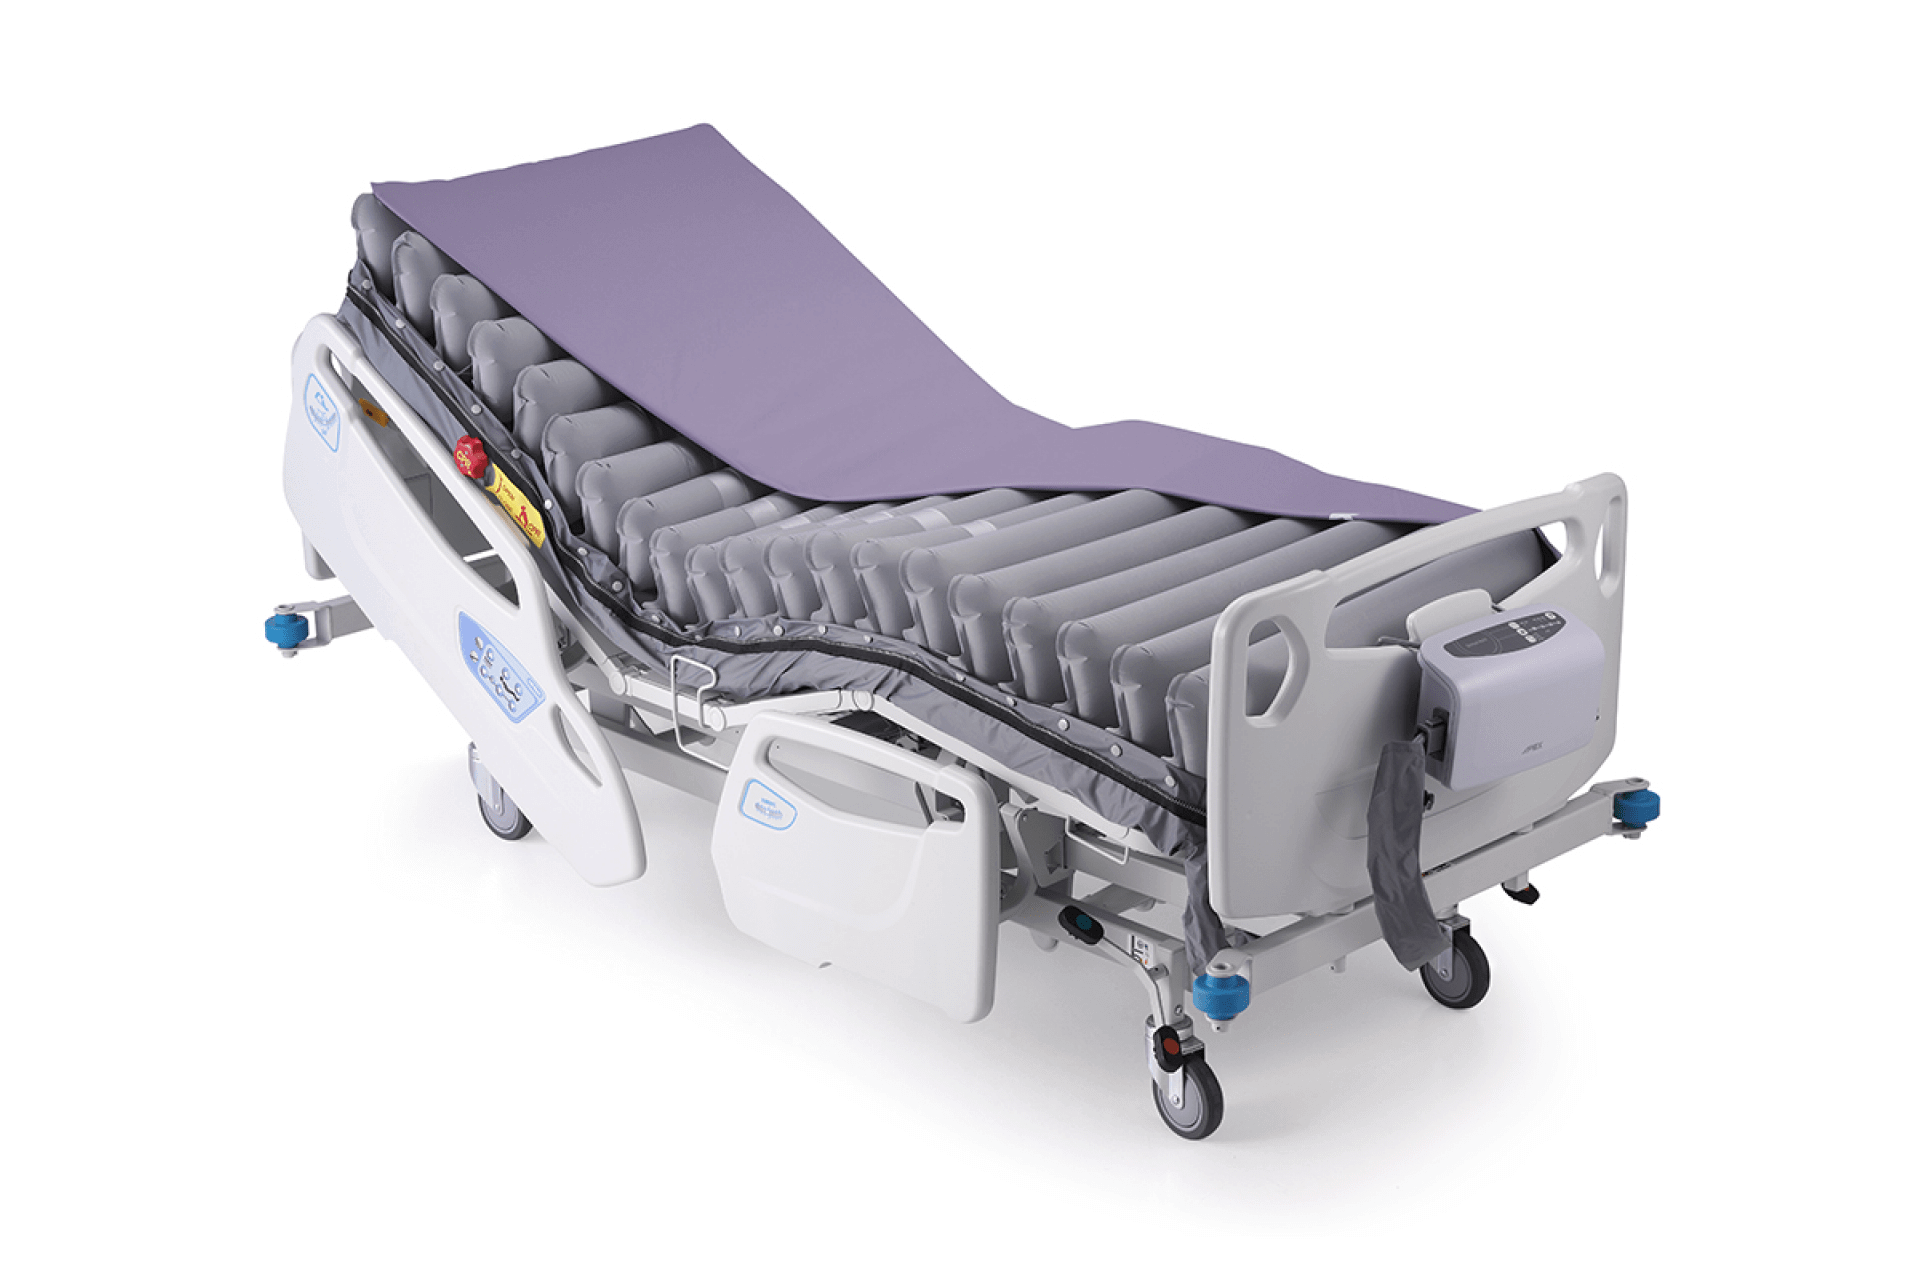 Domus Auto - Medical Bed - US  Wellell